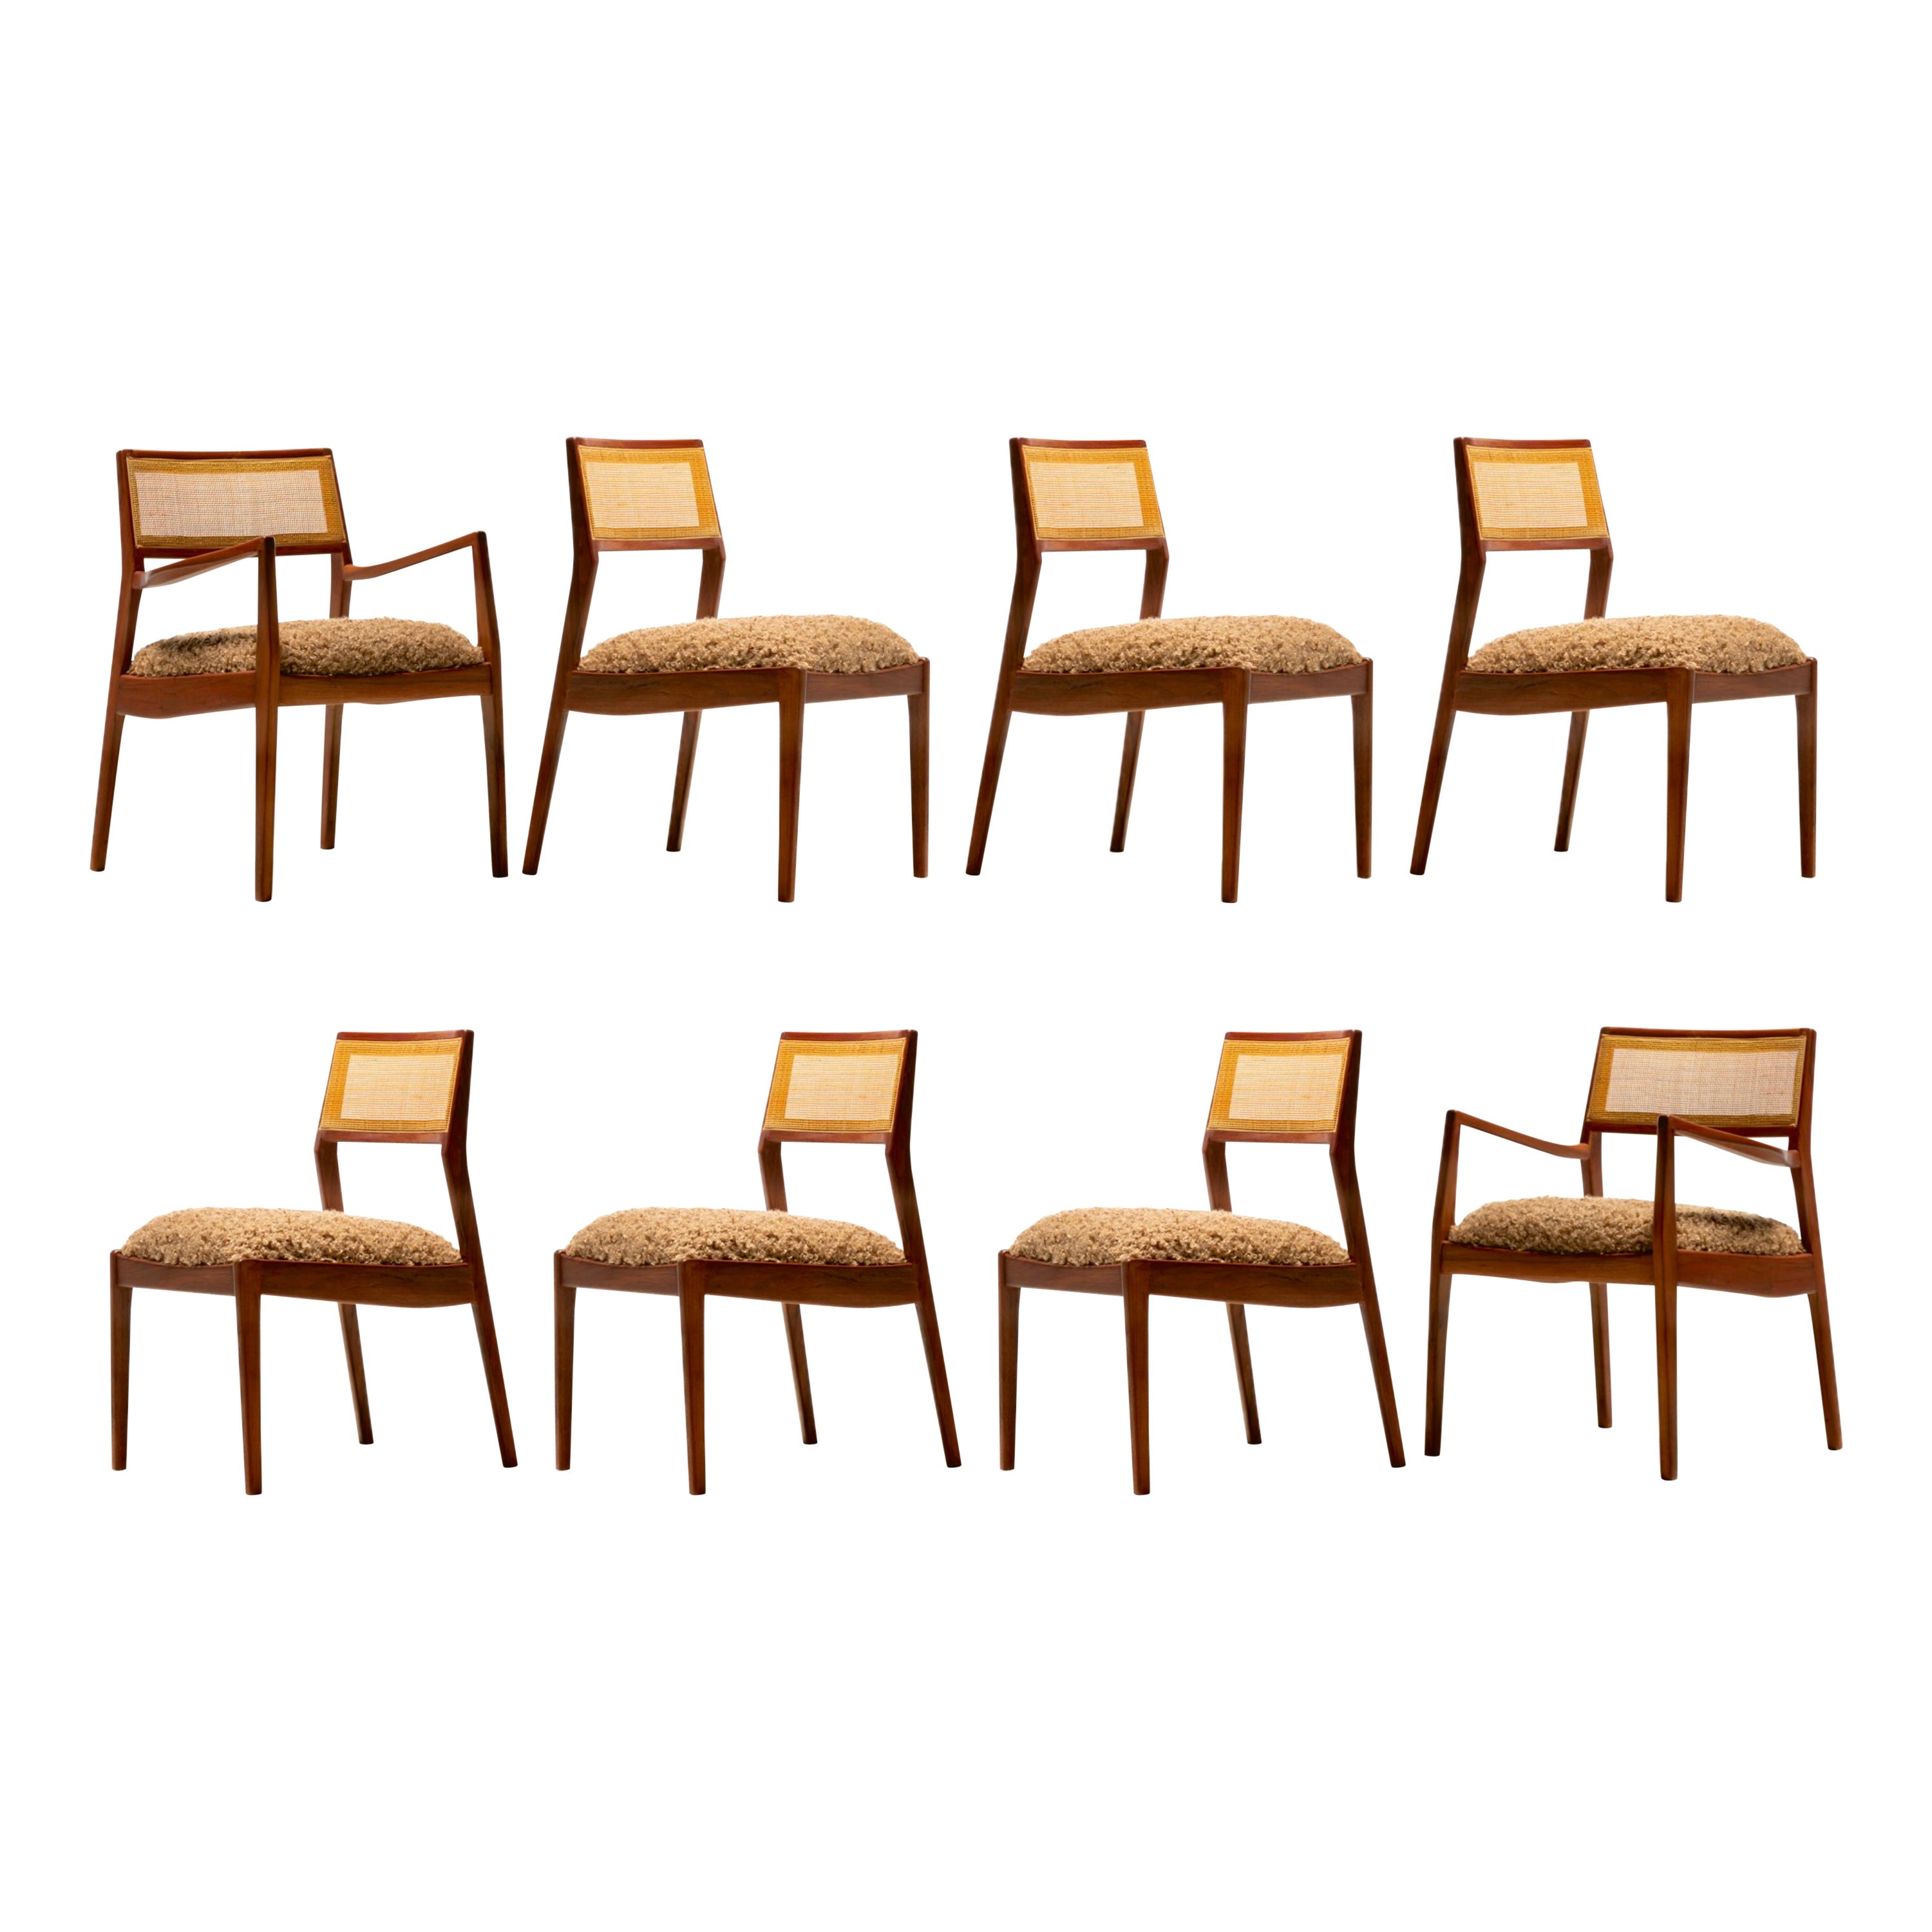 Set of 8 Fully Restored Jens Risom Mid-Century Modern Playboy Dining Chairs